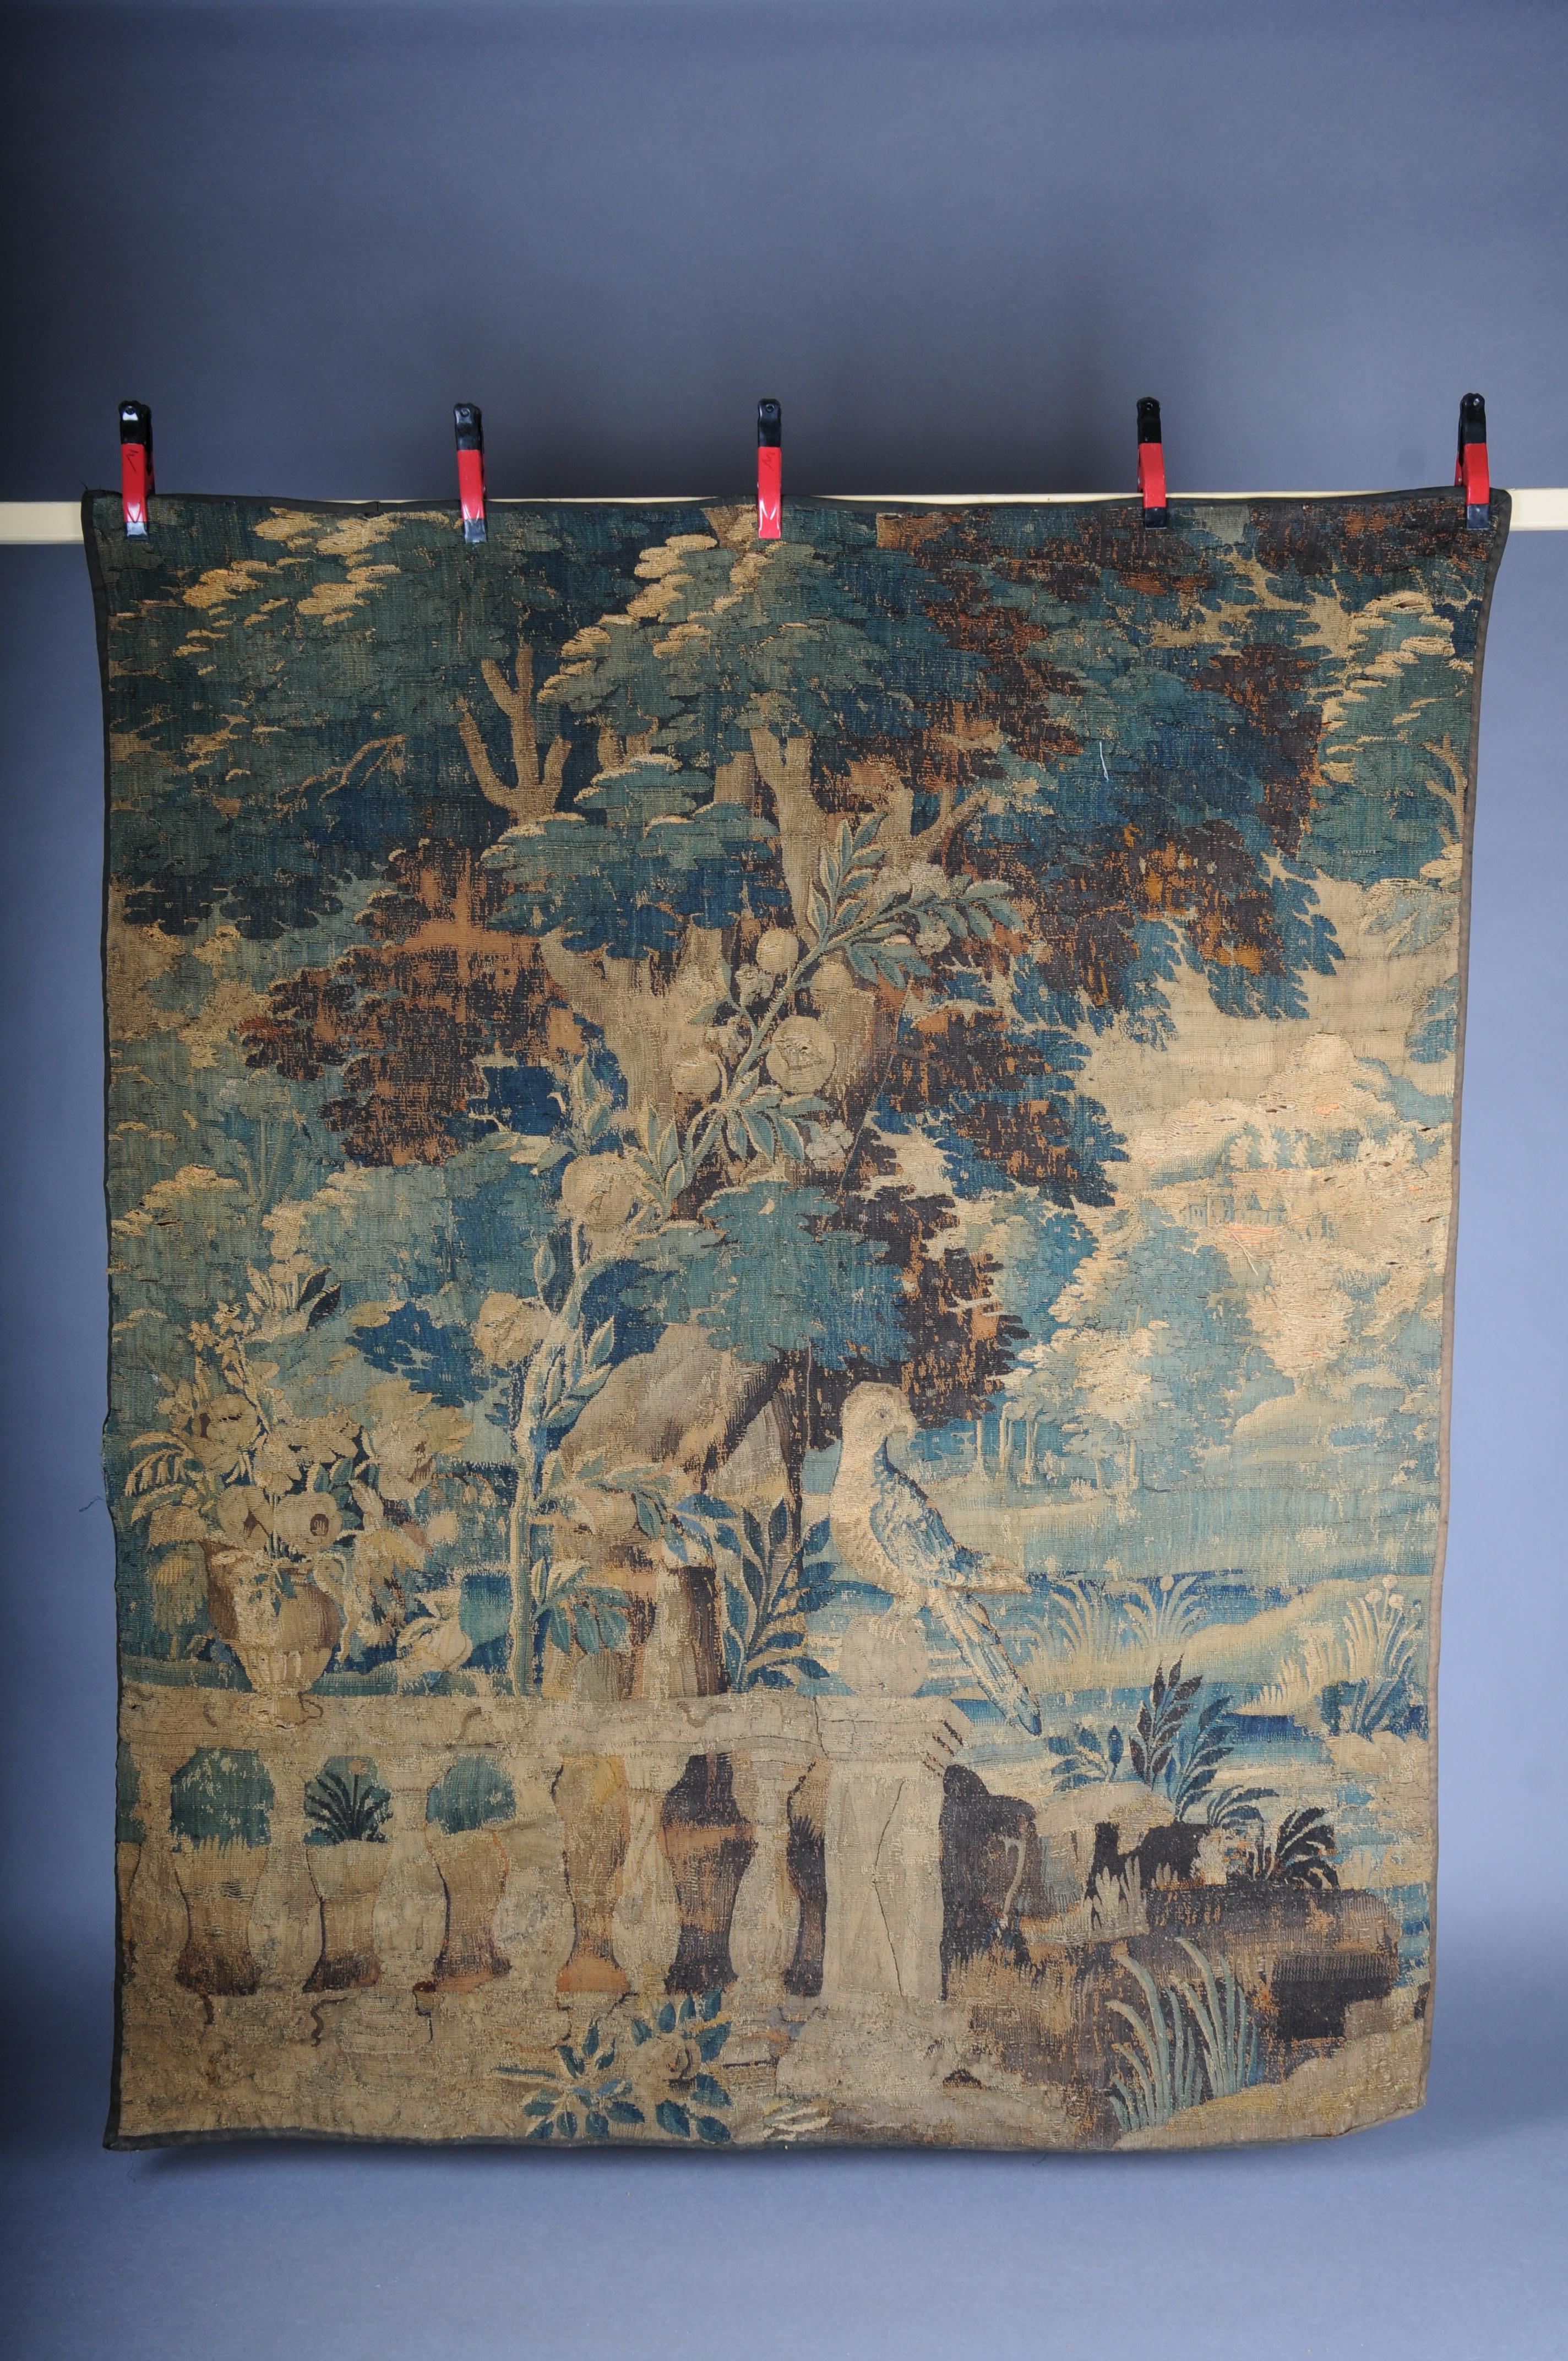 Antique Aubosson/Gobelein wall carpet, France late 17th century. Verdure motif, silk

Antique Musael Aubosson tapestry made of silk and partly wool. Very fine and antique design. Depicting: Verdure - tapestry depicting plants in green colors. A very